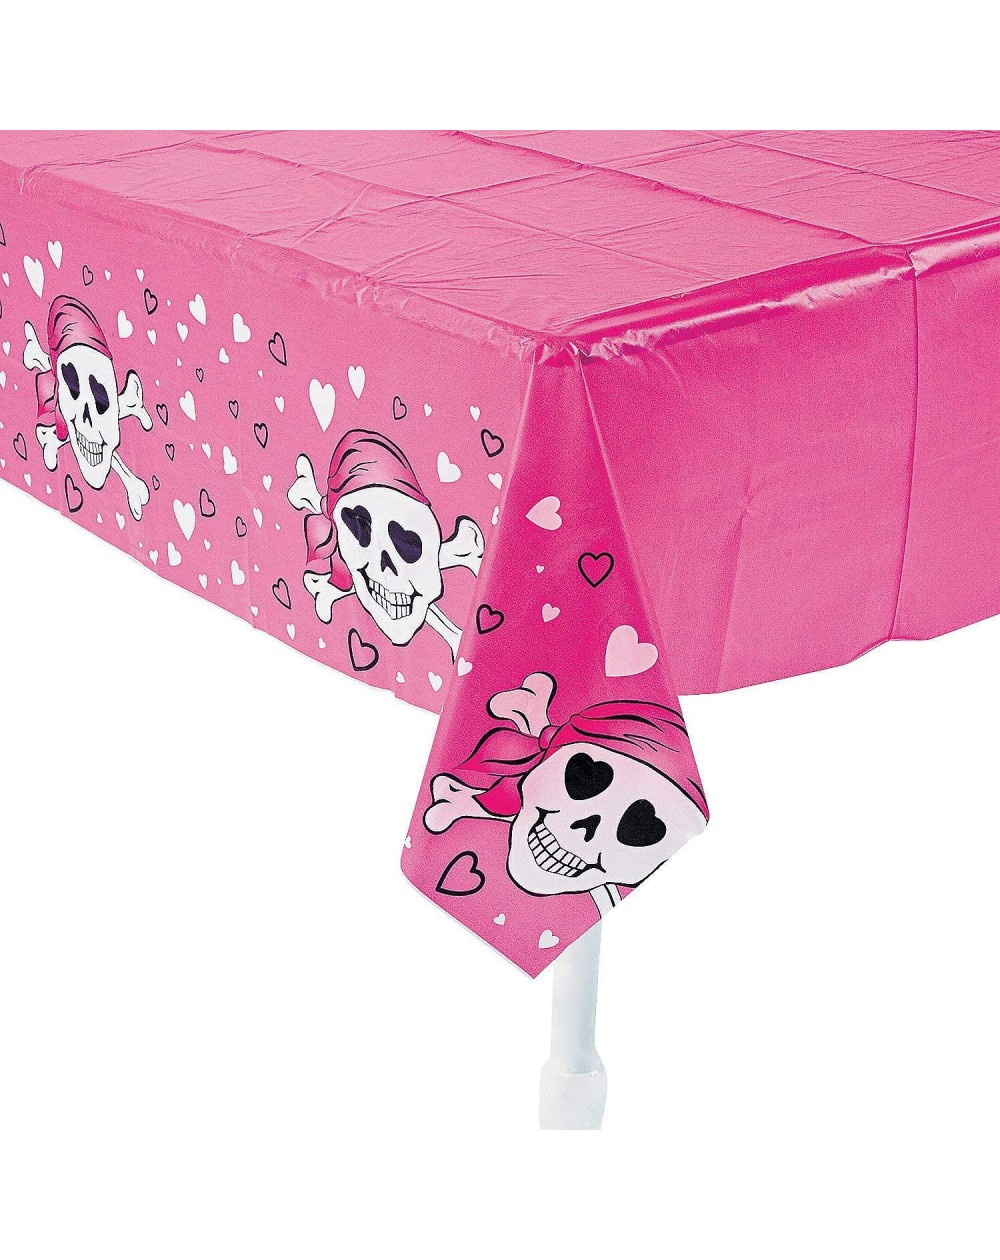 Tablecovers PINK PIRATE GIRL TABLECOVER - Party Supplies - 1 Piece - CR119VGBP3R $8.34